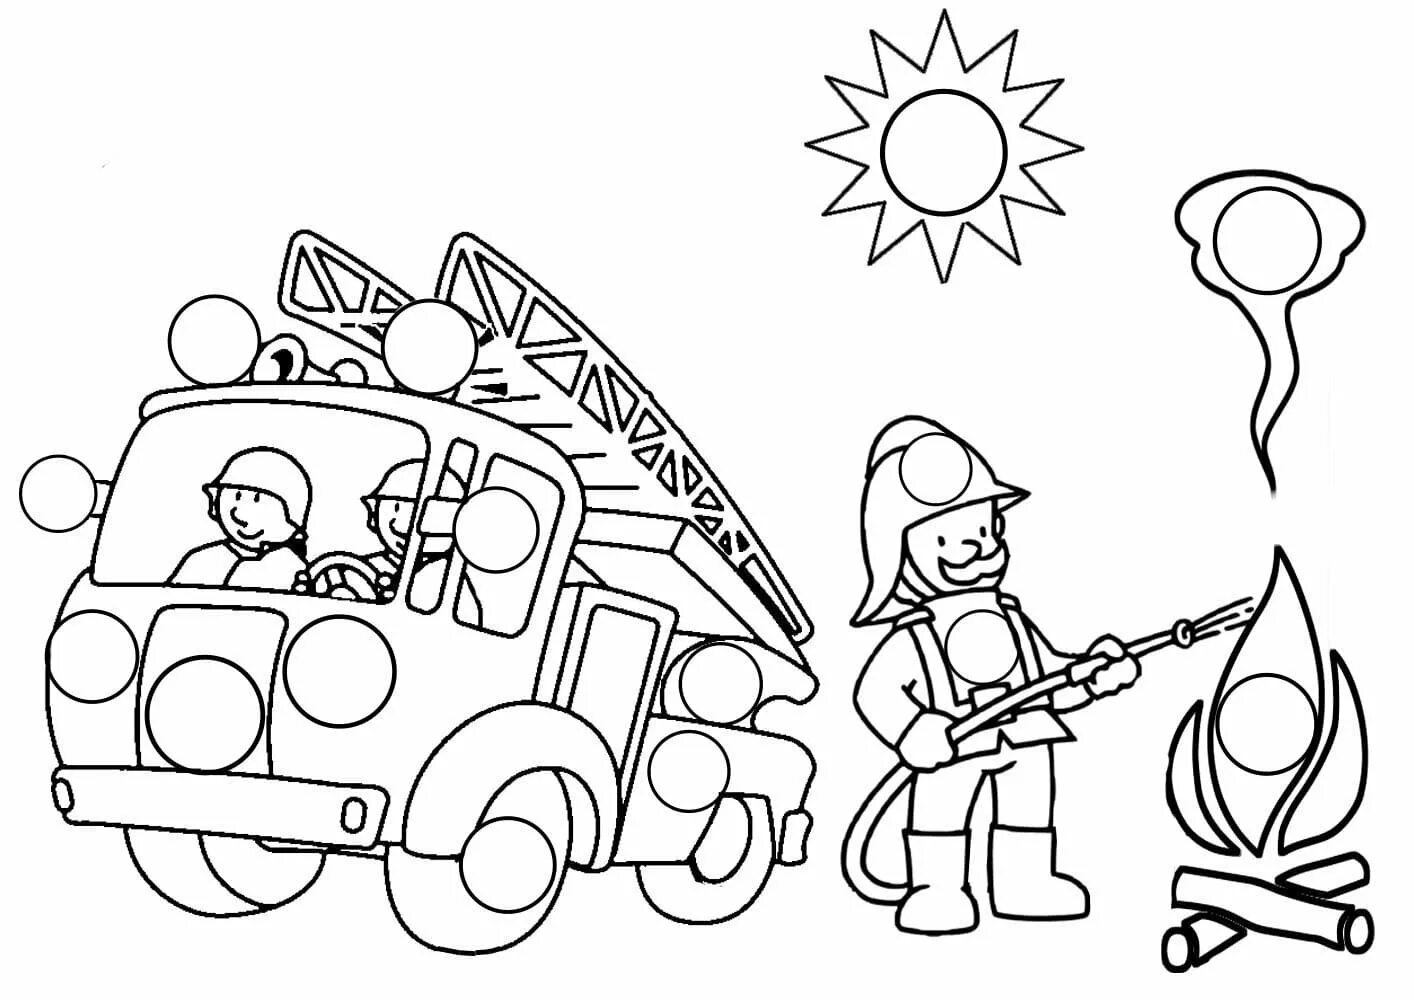 Adorable safety coloring page for kids